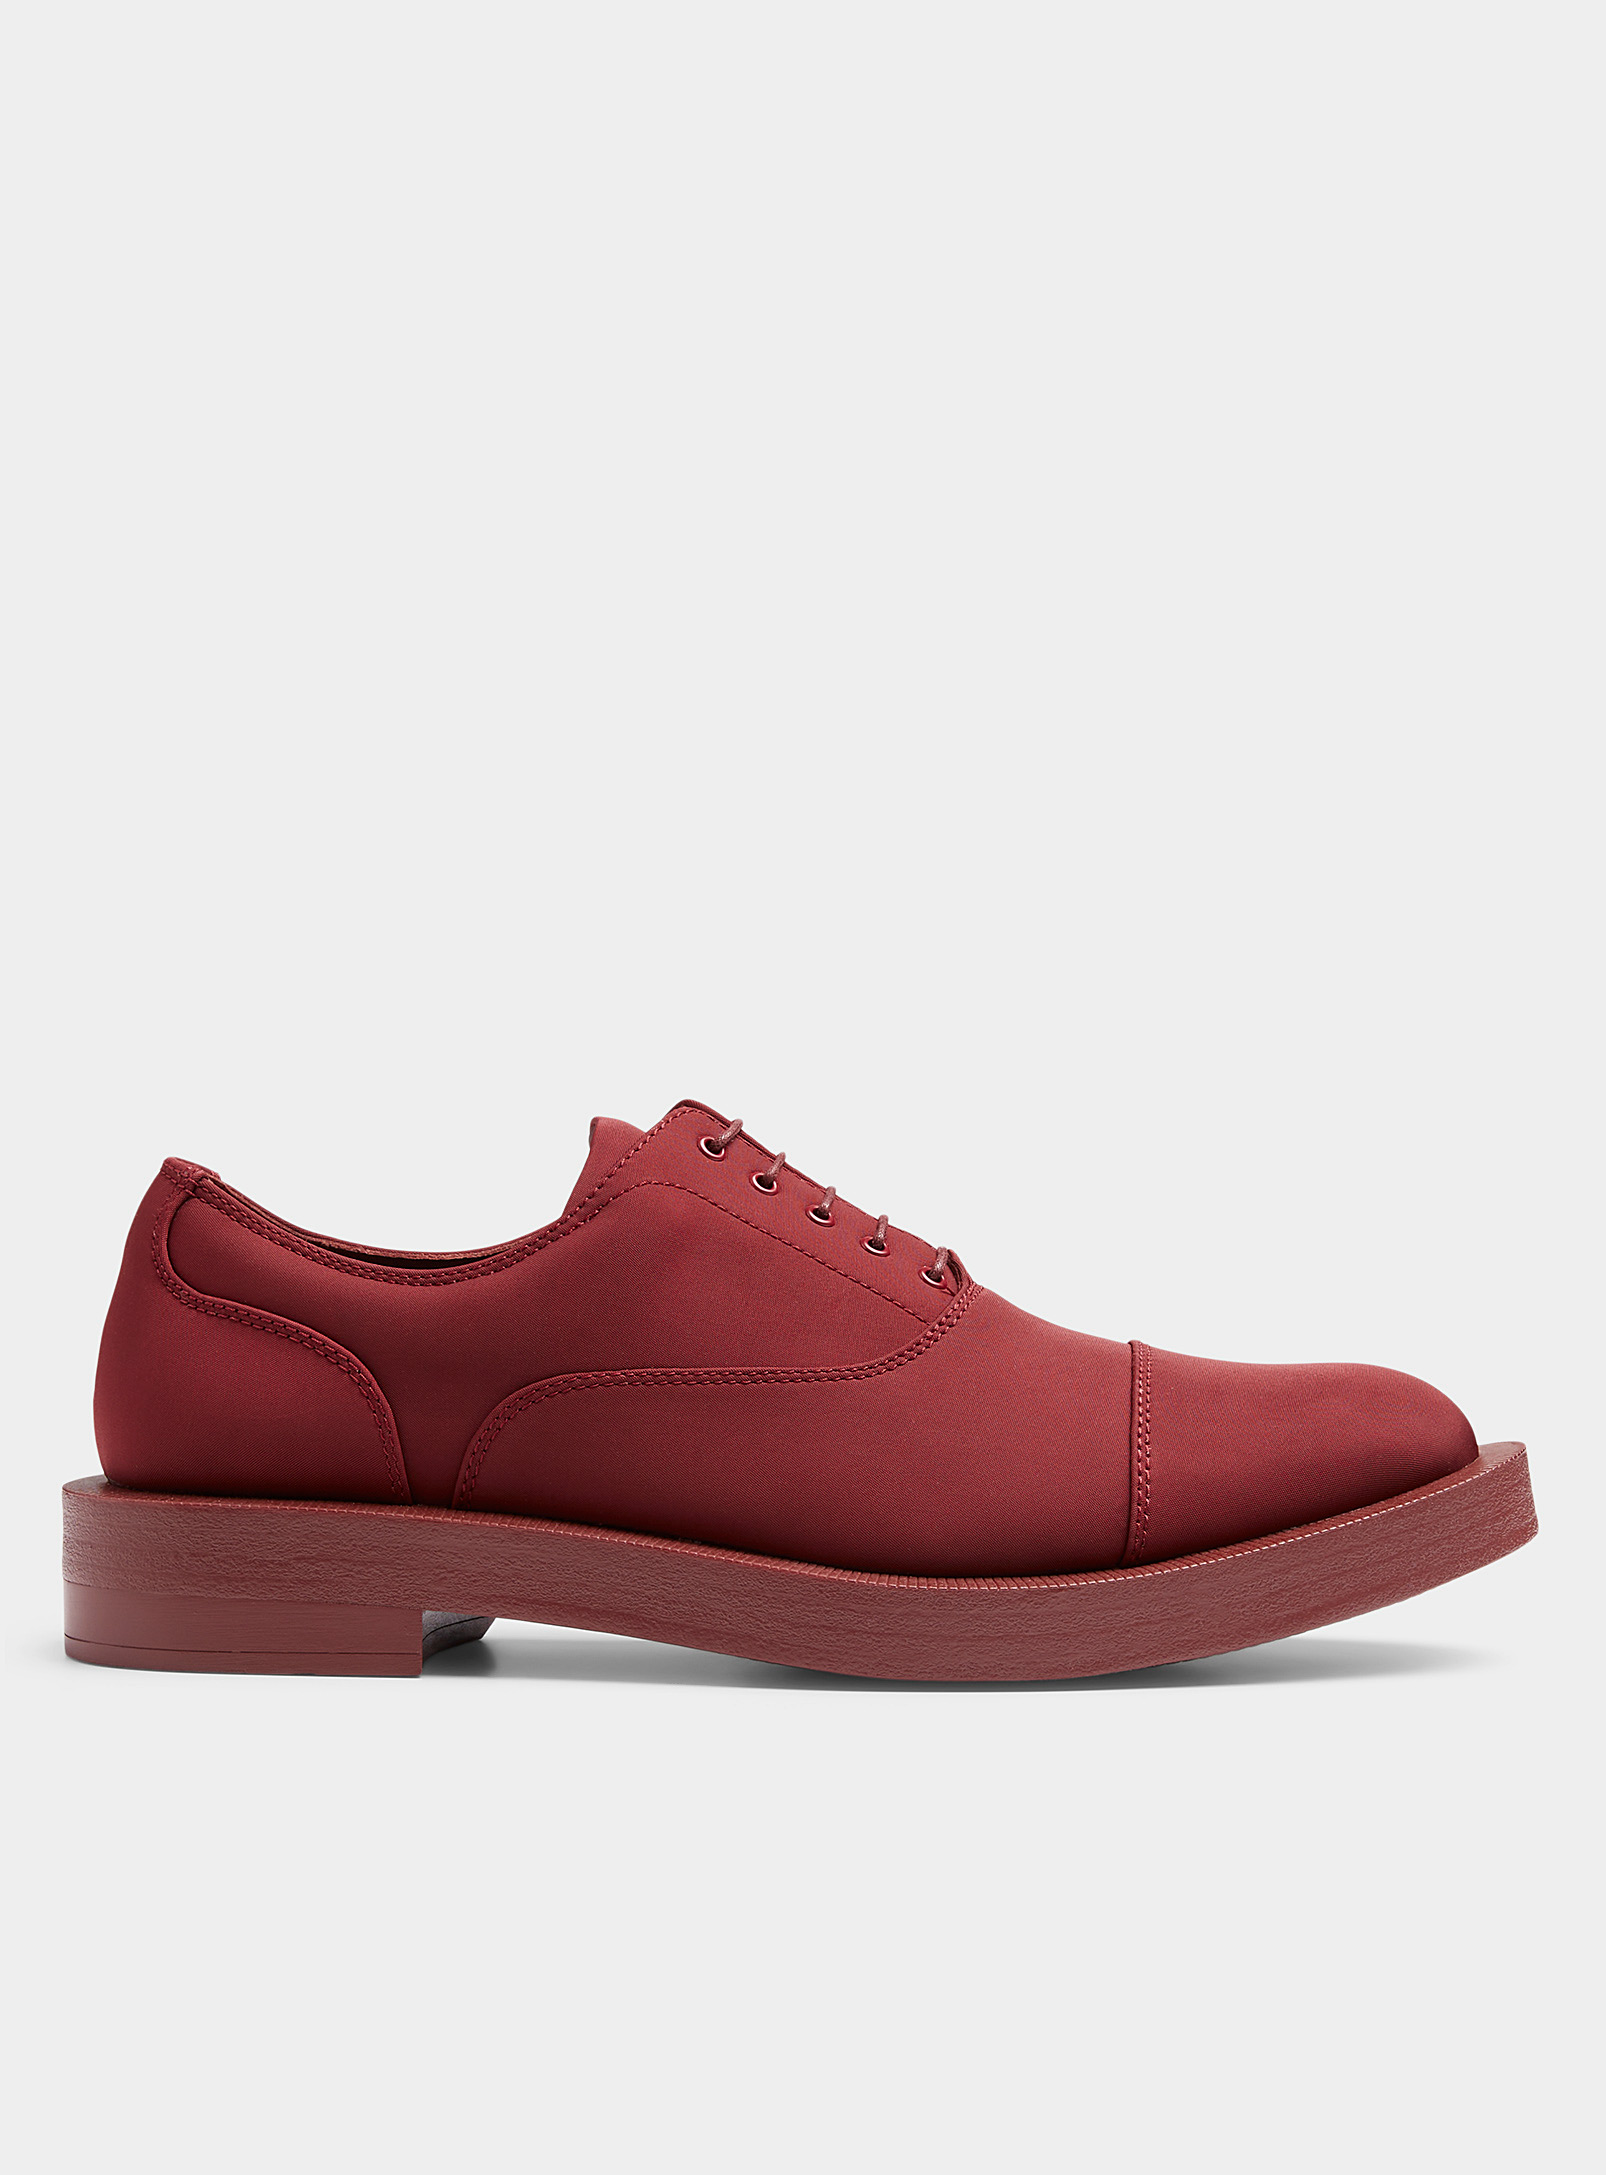 Martine Rose X Clarks Matte Derby Shoes Men In Ruby Red